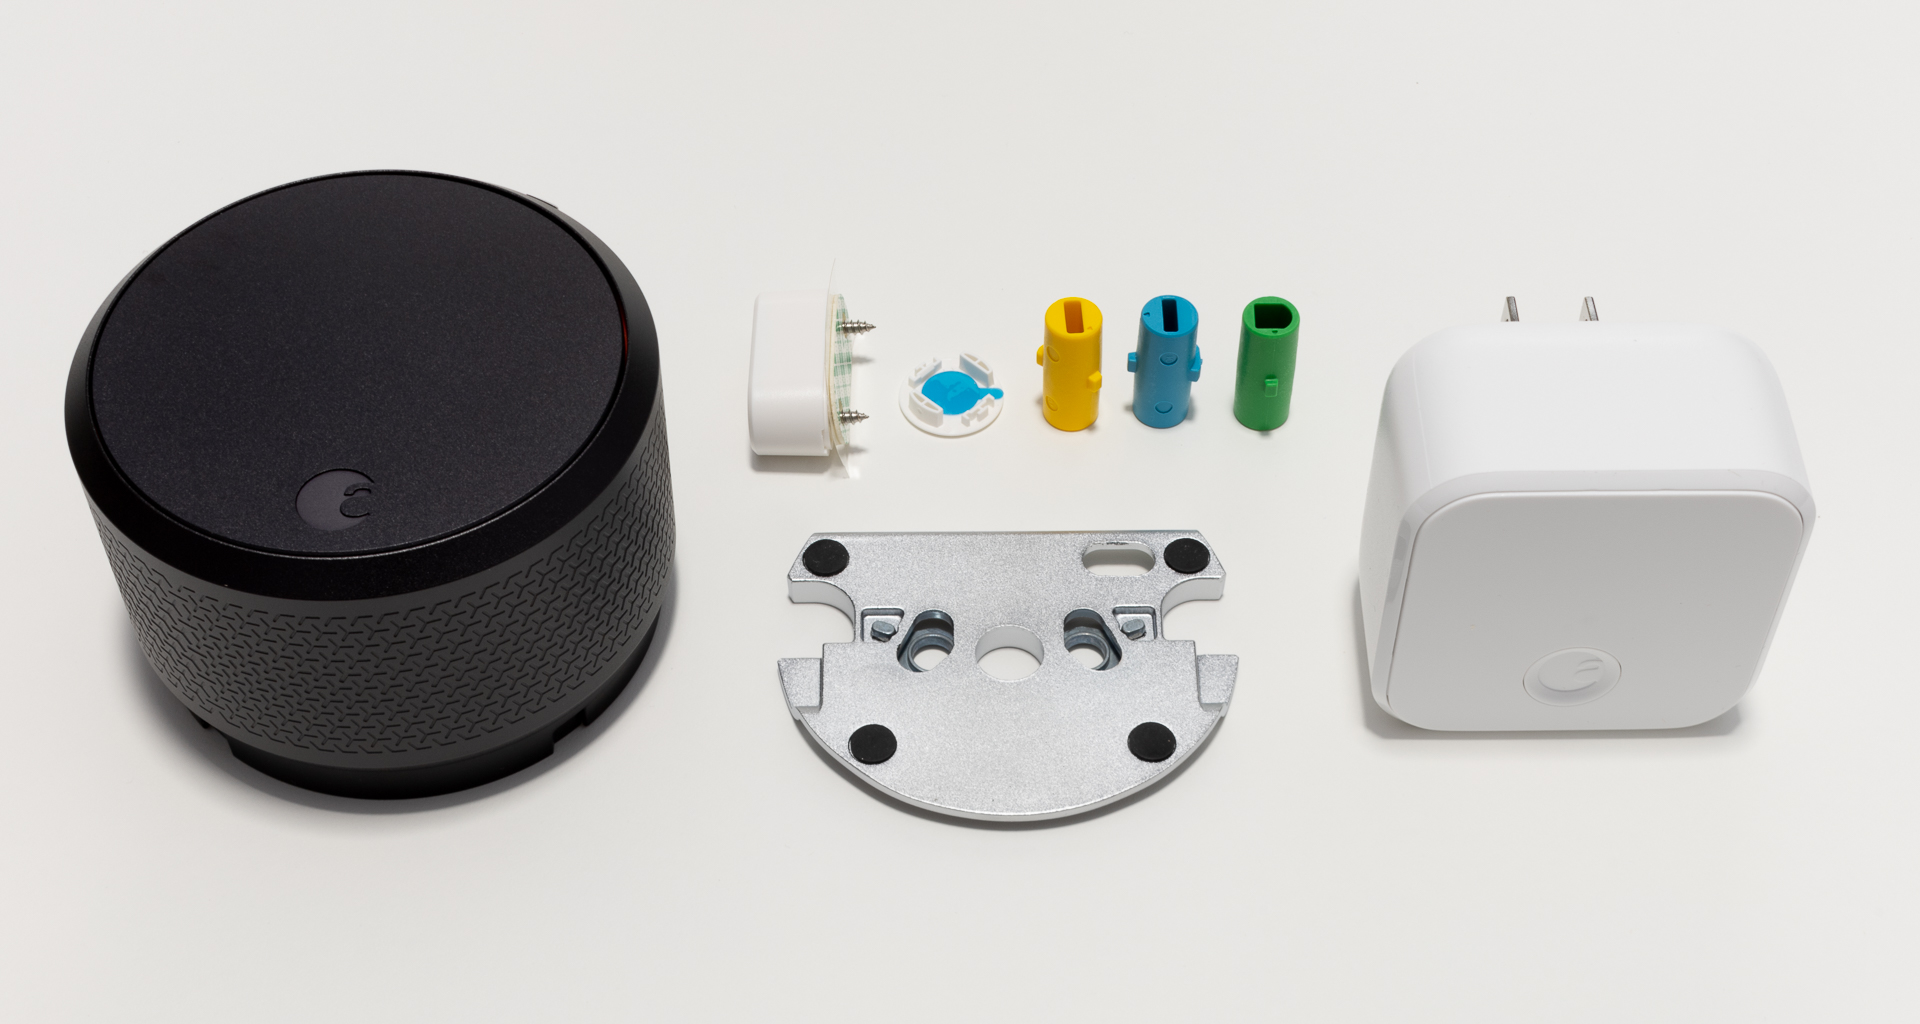 The August Smart Lock Pro components. Image: Digitized House.